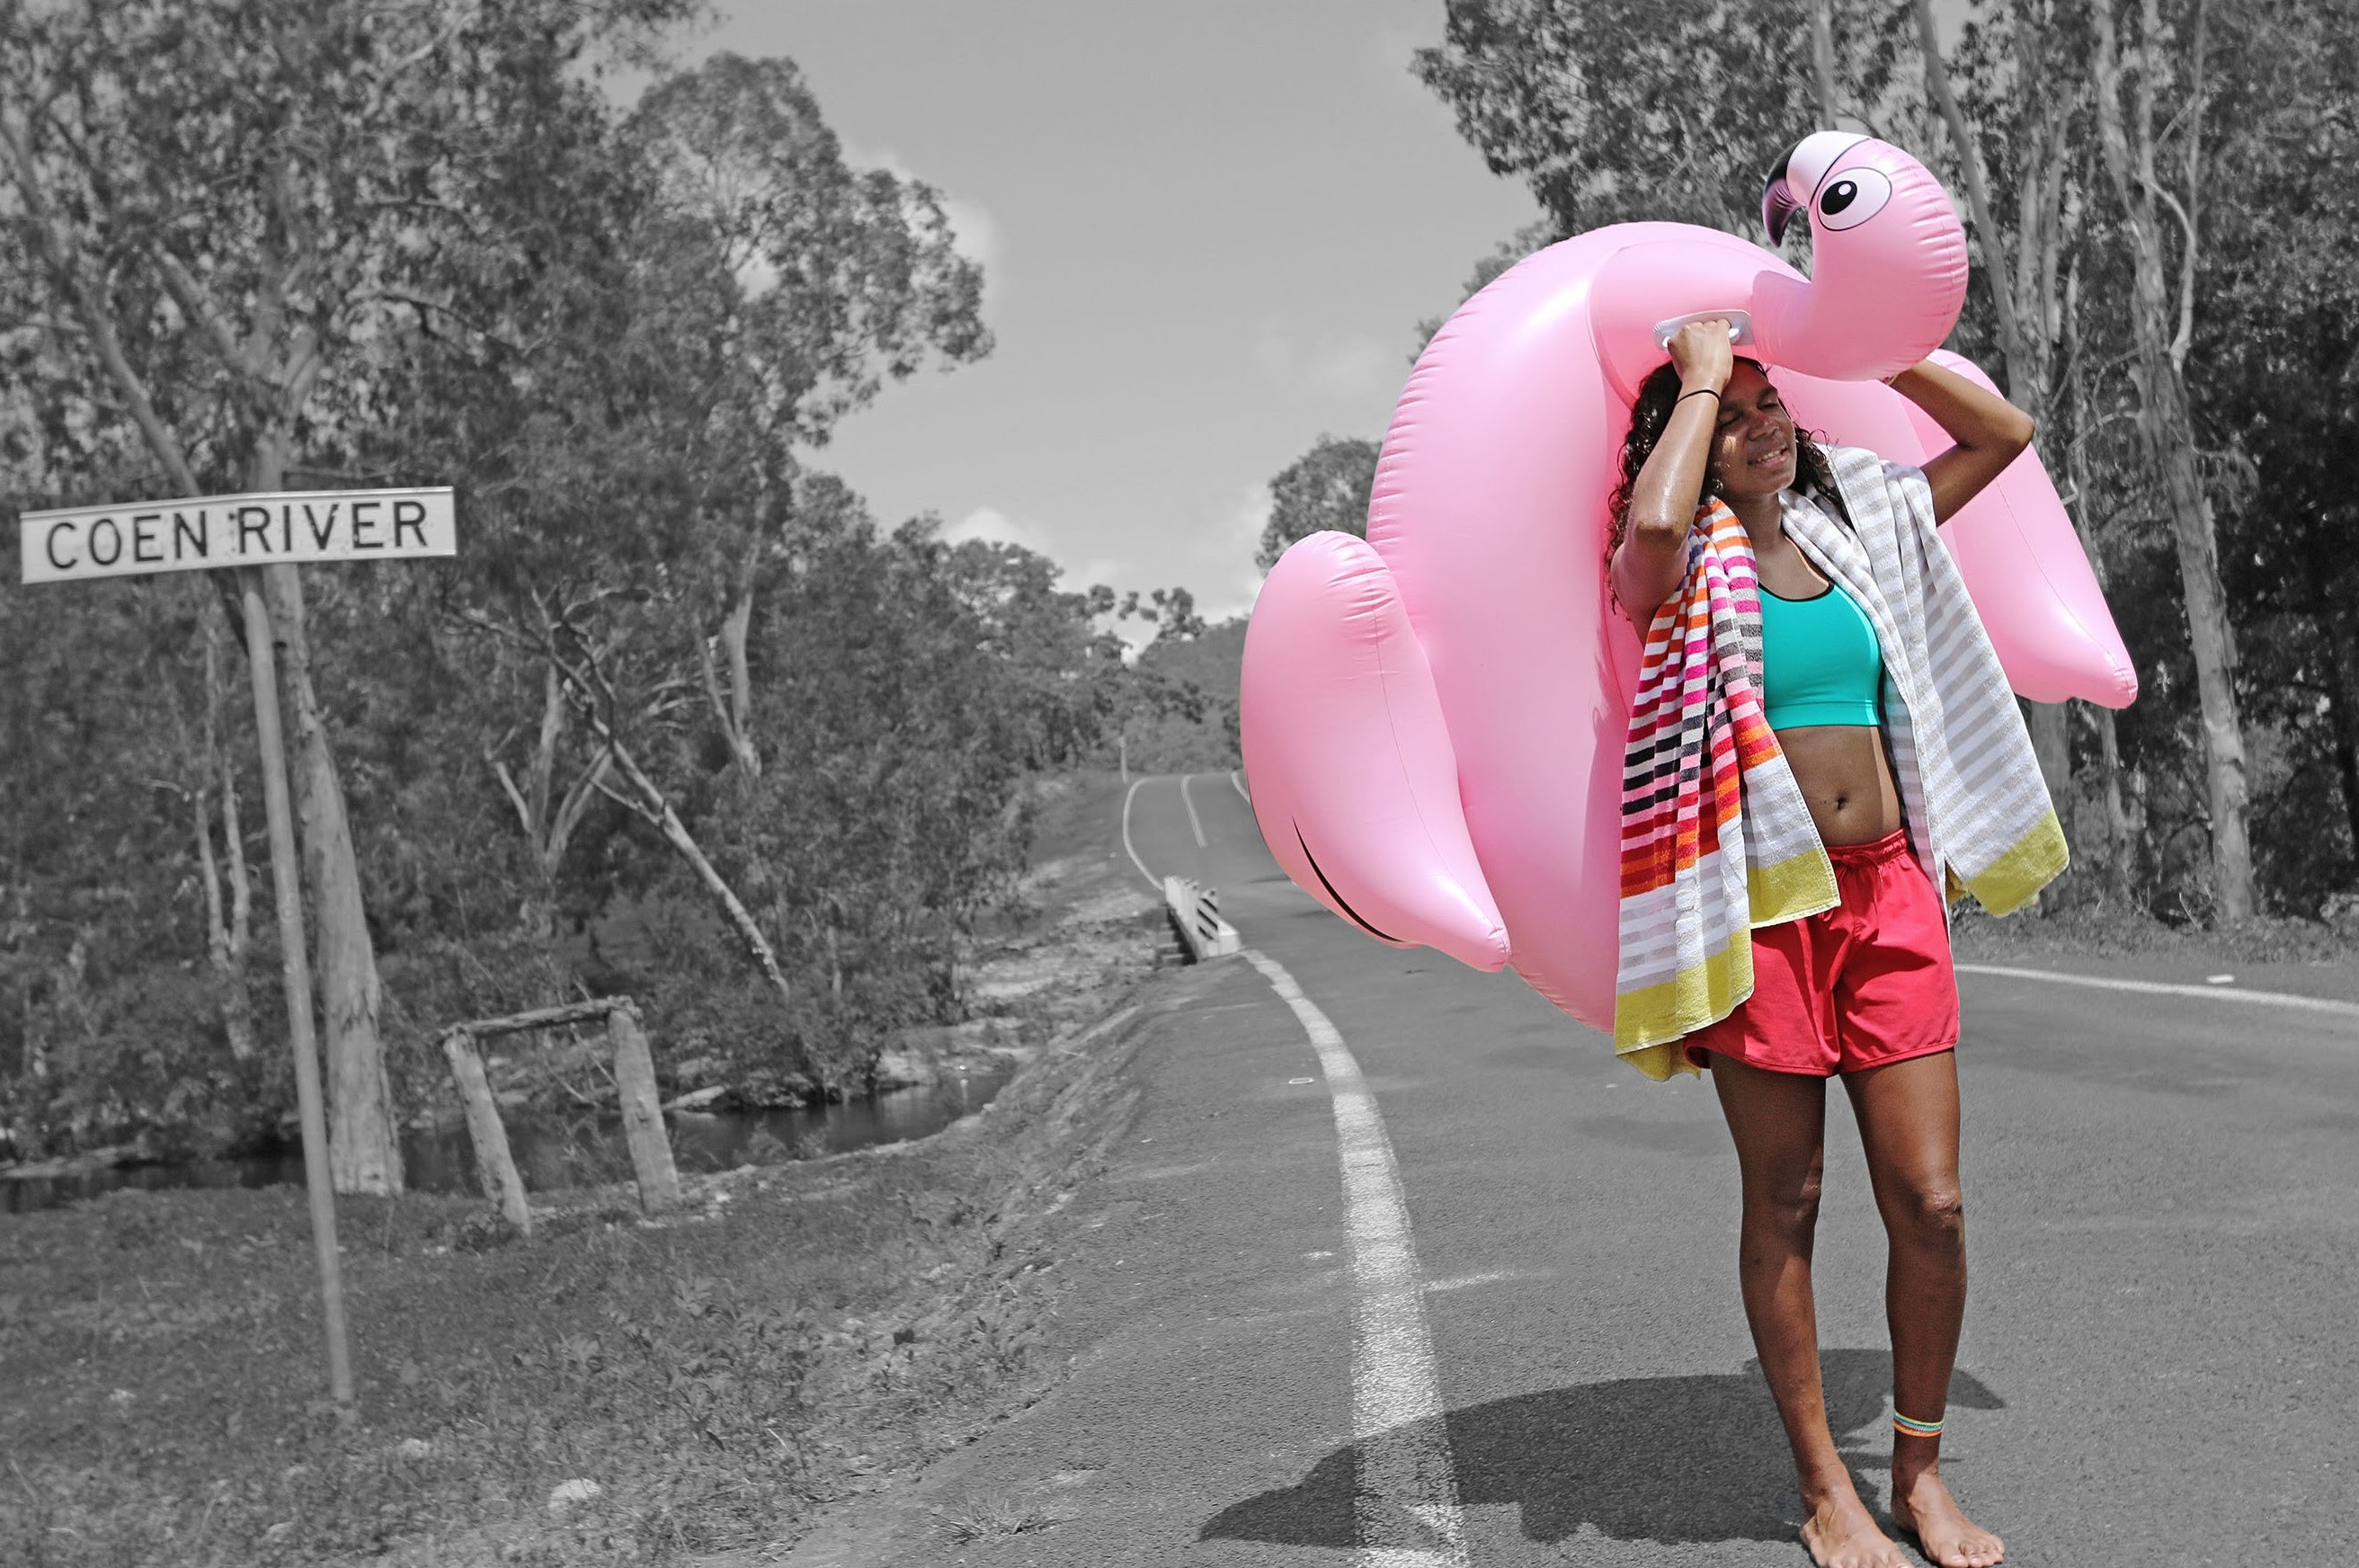 A woman carrying a pink inflatable bird behind her back and head, walking along a road with a road sign Coen River.